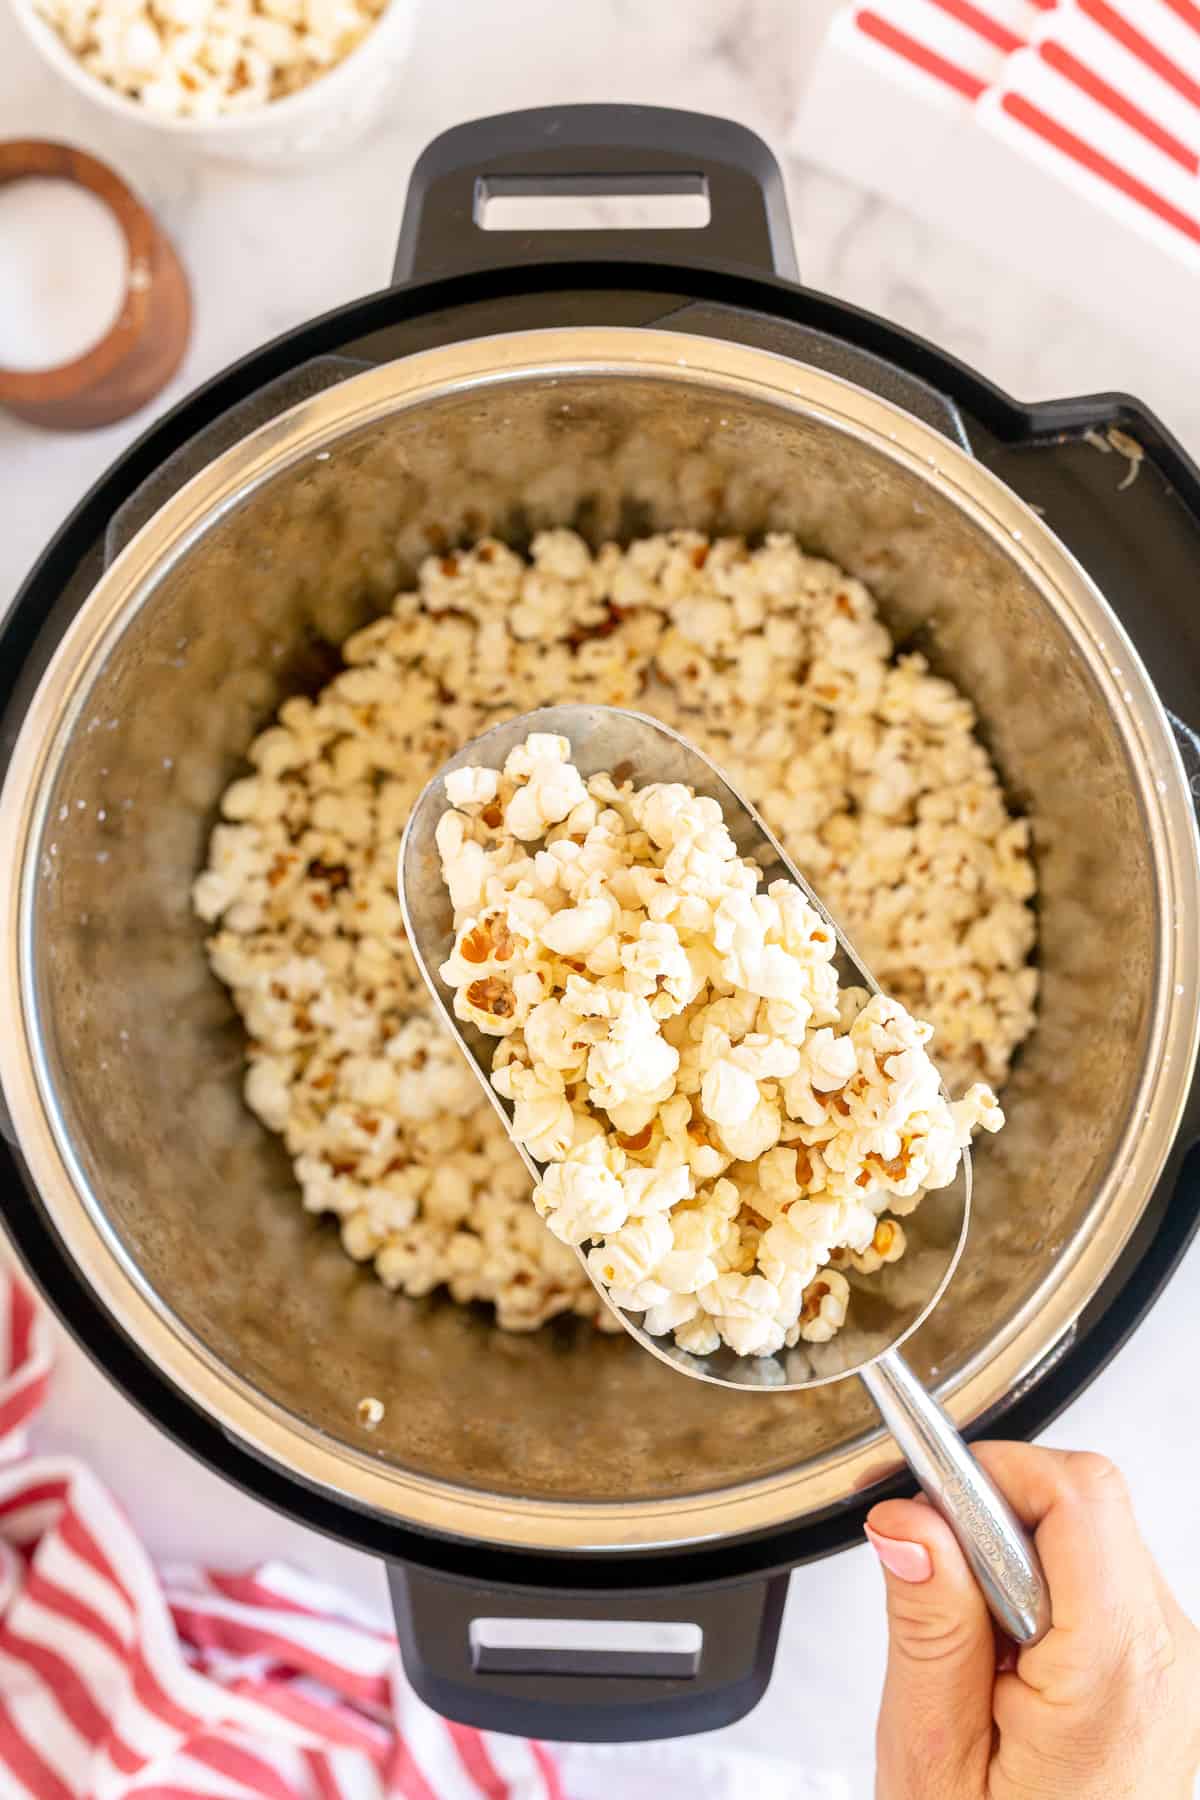 A metal scoop scoops popcorn from an Instant Pot.